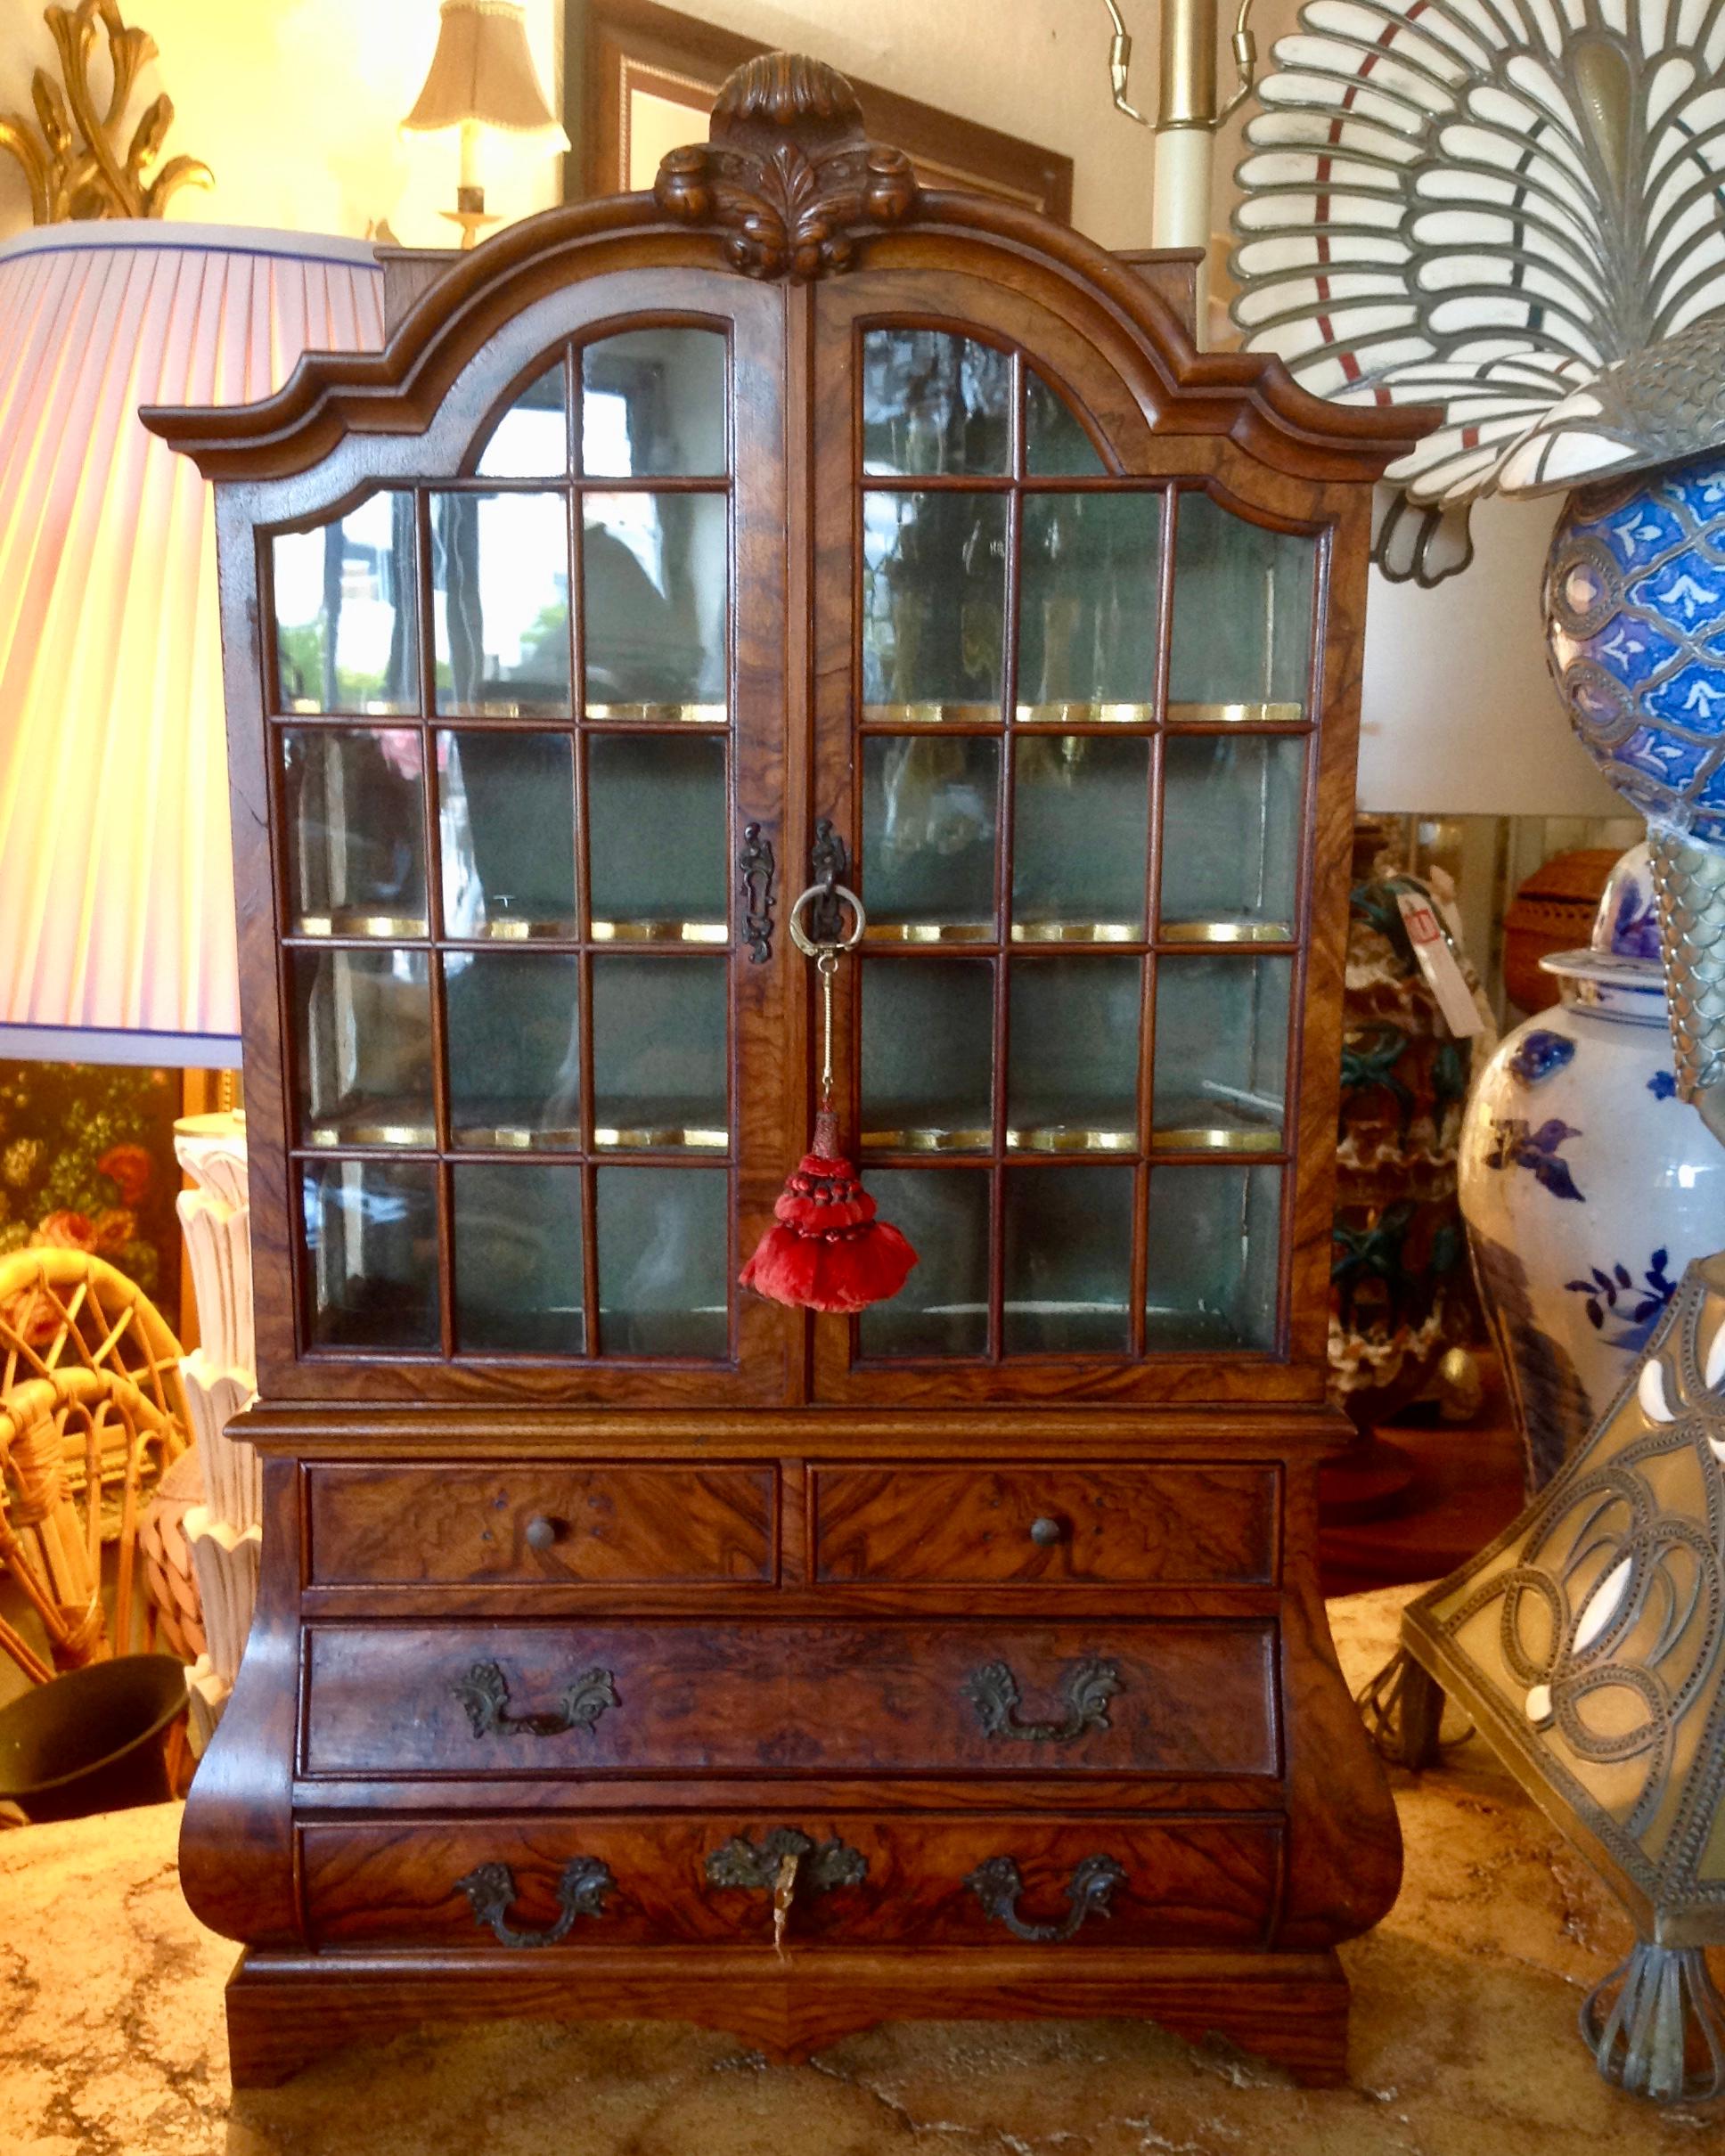 A rare and important miniature. The piece is fashioned with a bombe' base
and a top designed with a fleur de lis carved crown. The glass panes are set individually.
The serpentine shelves have gilded edges. It is fitted with 4 lined drawers and